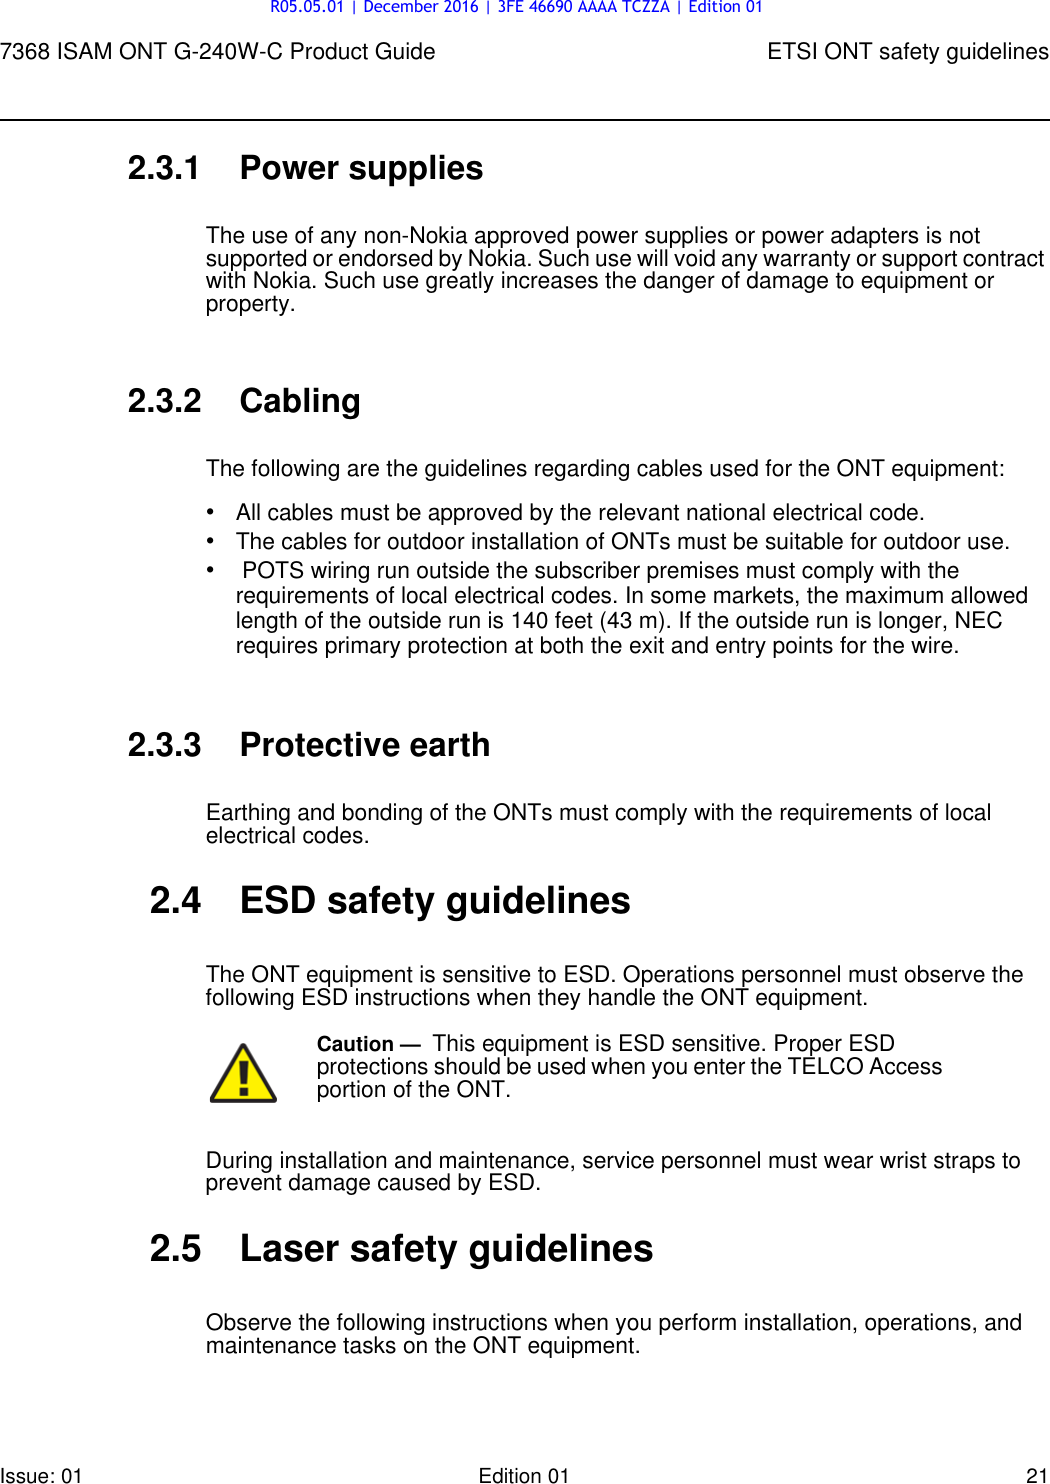 Page 21 of Nokia Bell G240W-C GPON ONU User Manual 7368 ISAM ONT G 240W B Product Guide